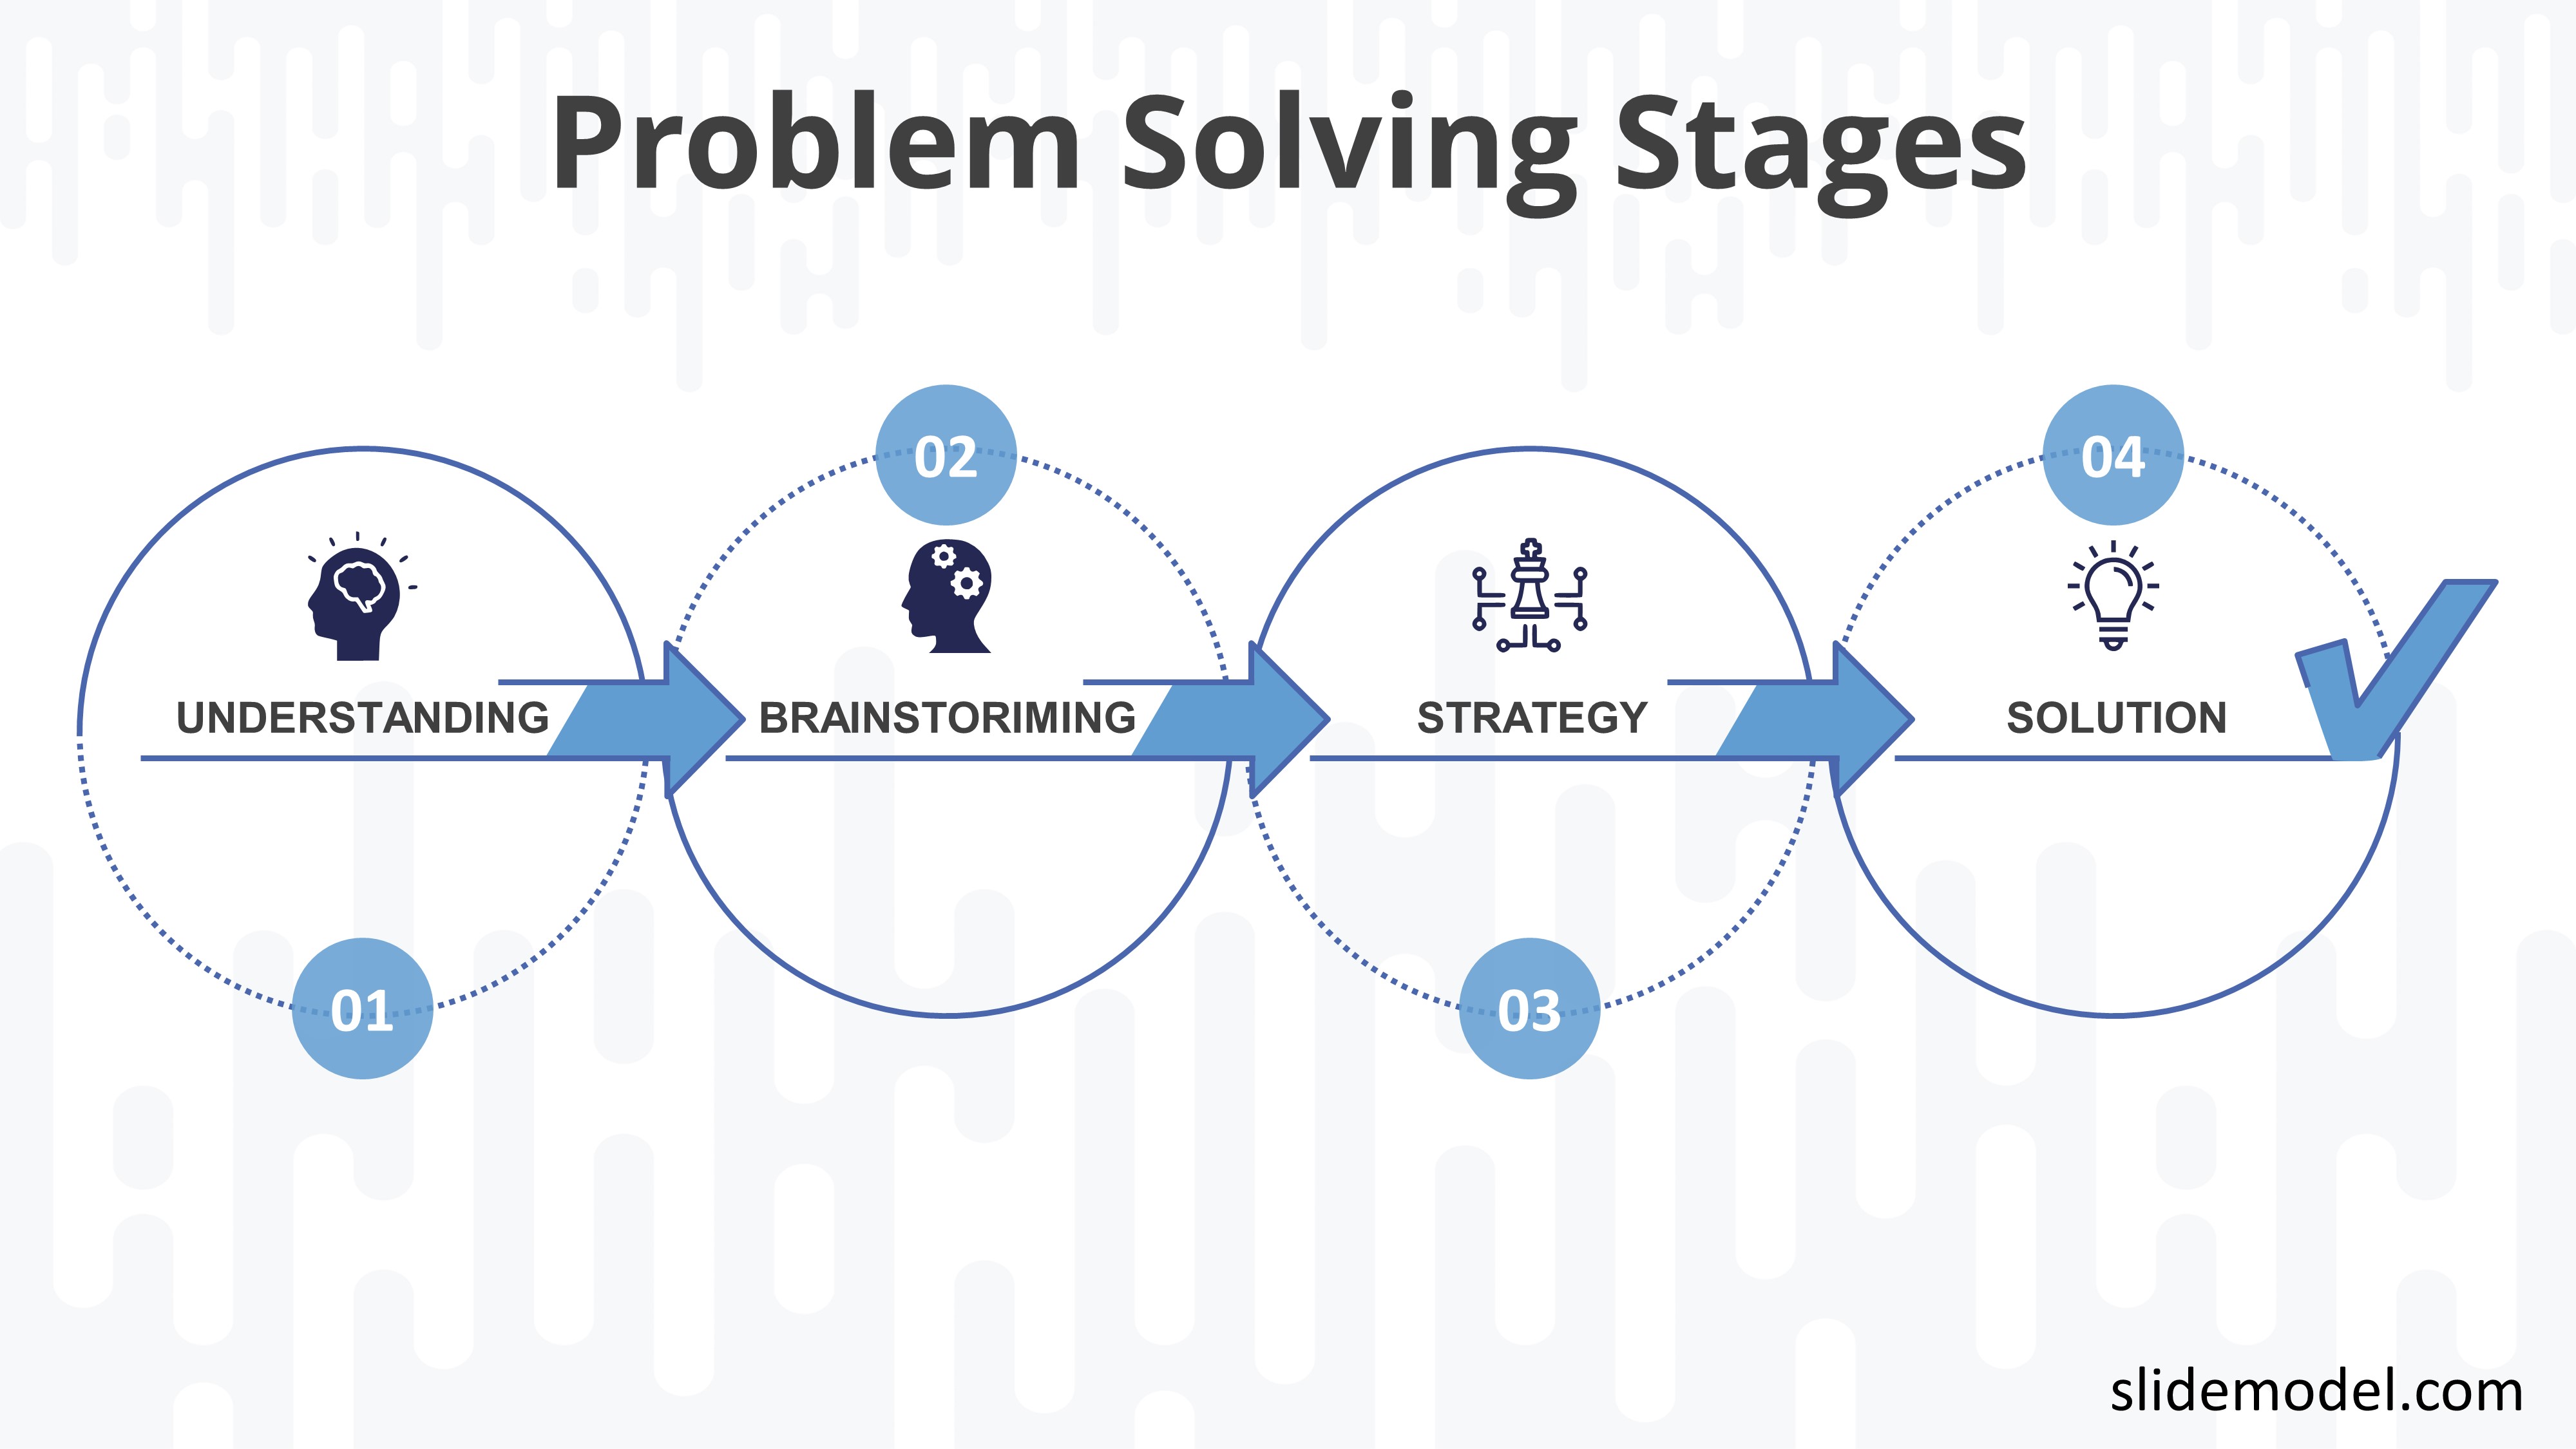 PPT Template Problem Solving Stages